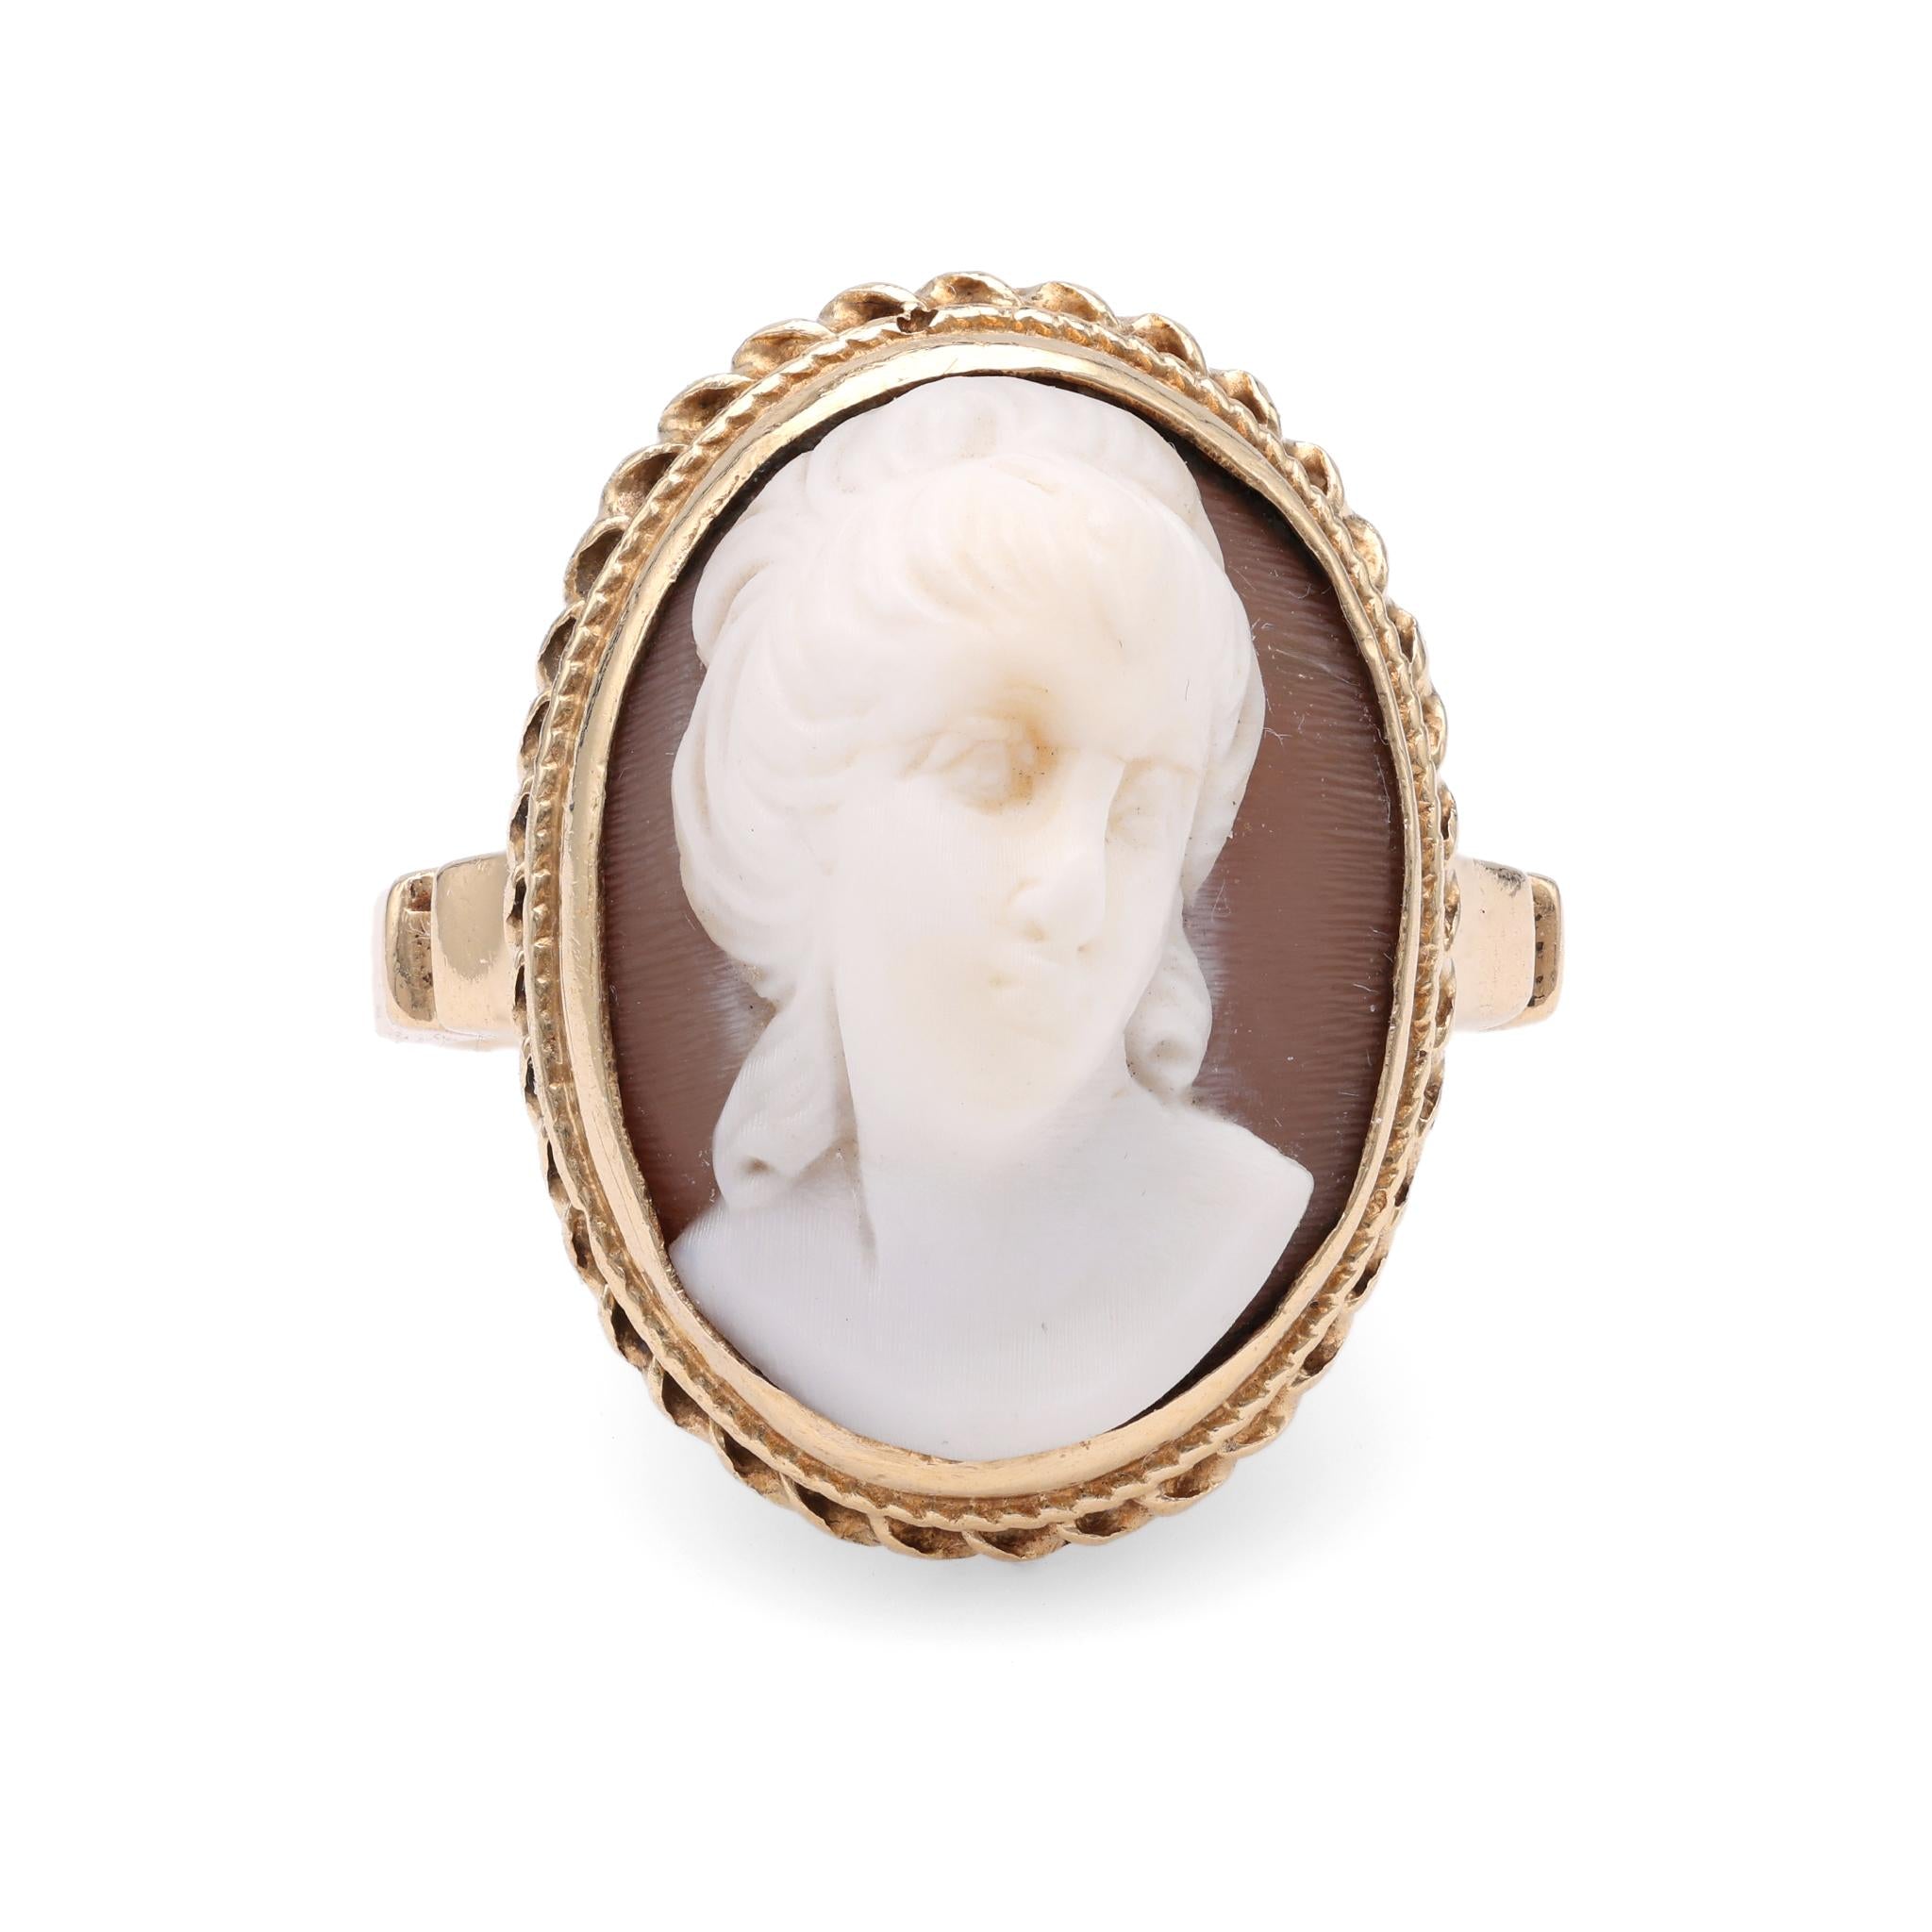 Antique Cameo Yellow Gold Ring